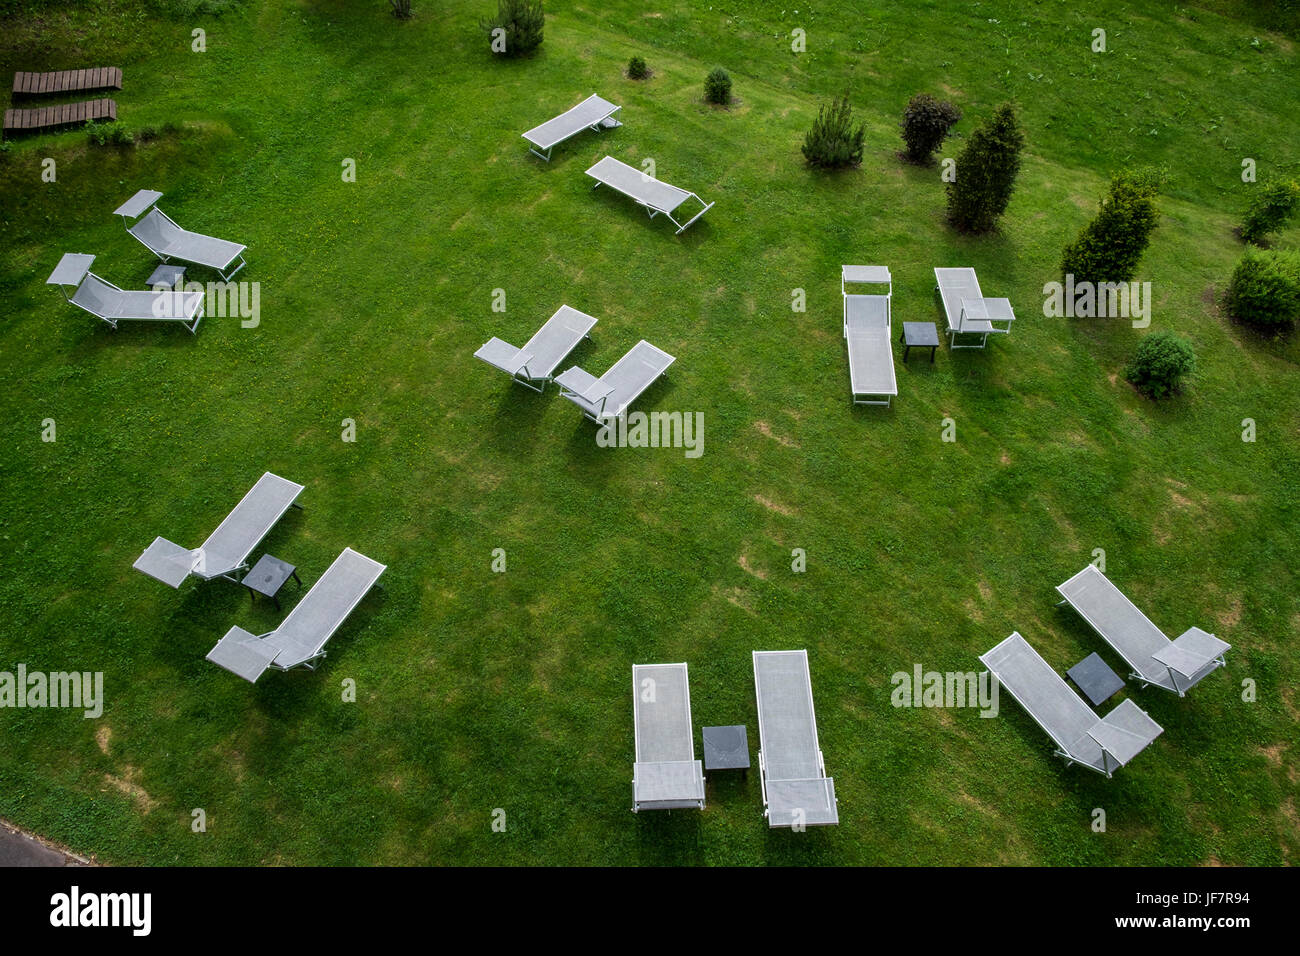 Unoccupied sun loungers on a grass lawn arranged in a circle. Stock Photo